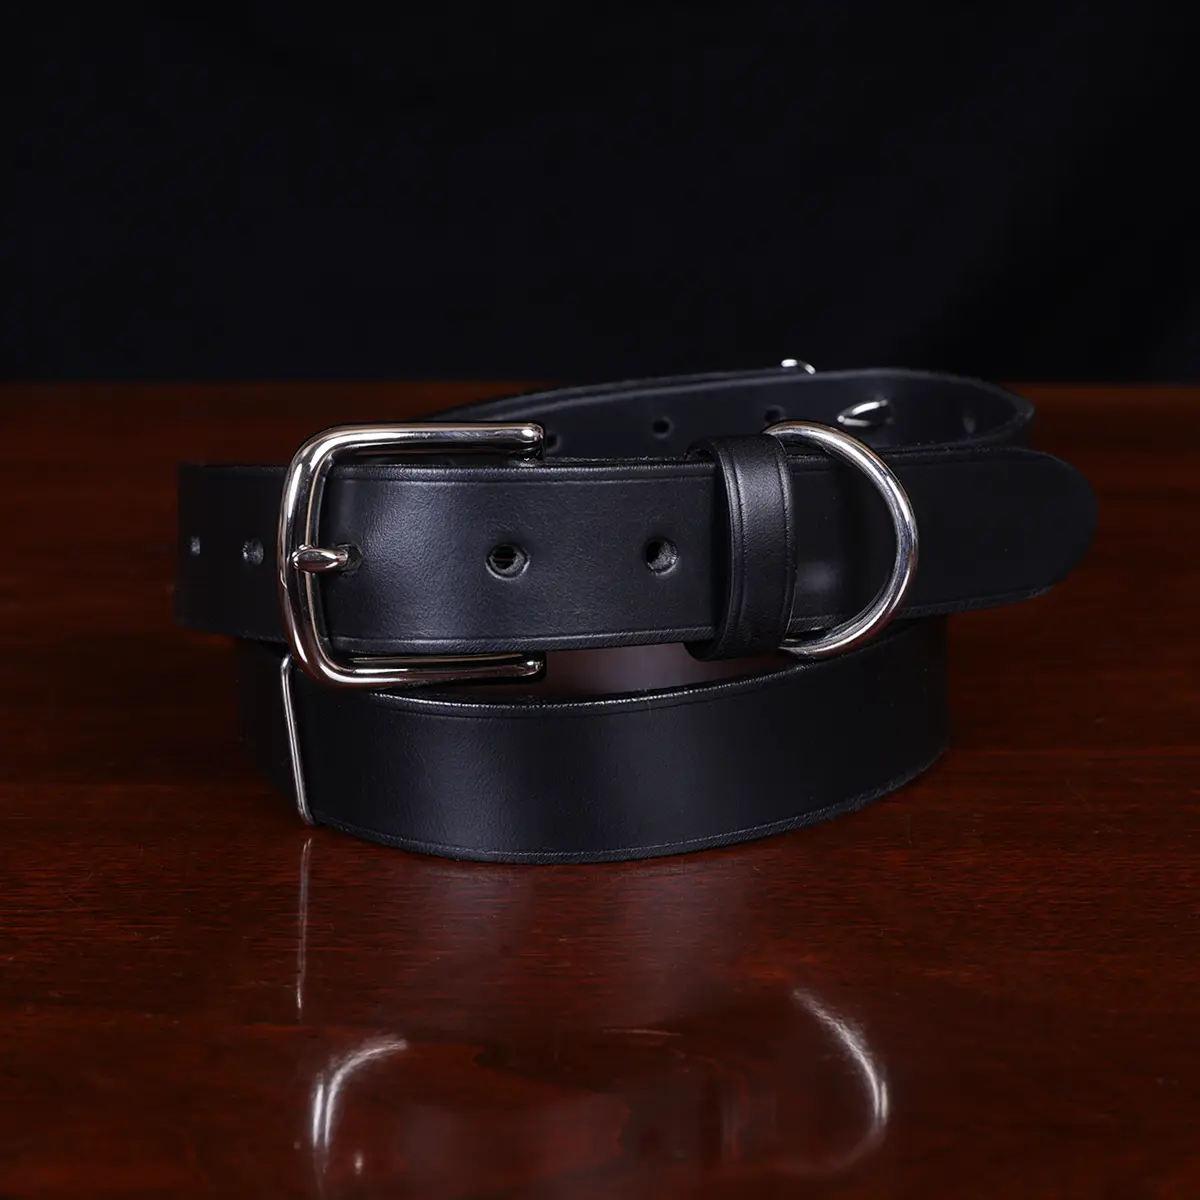 Adjustable Leather Belt, No. 1 - One Size Fits Most, USA Made